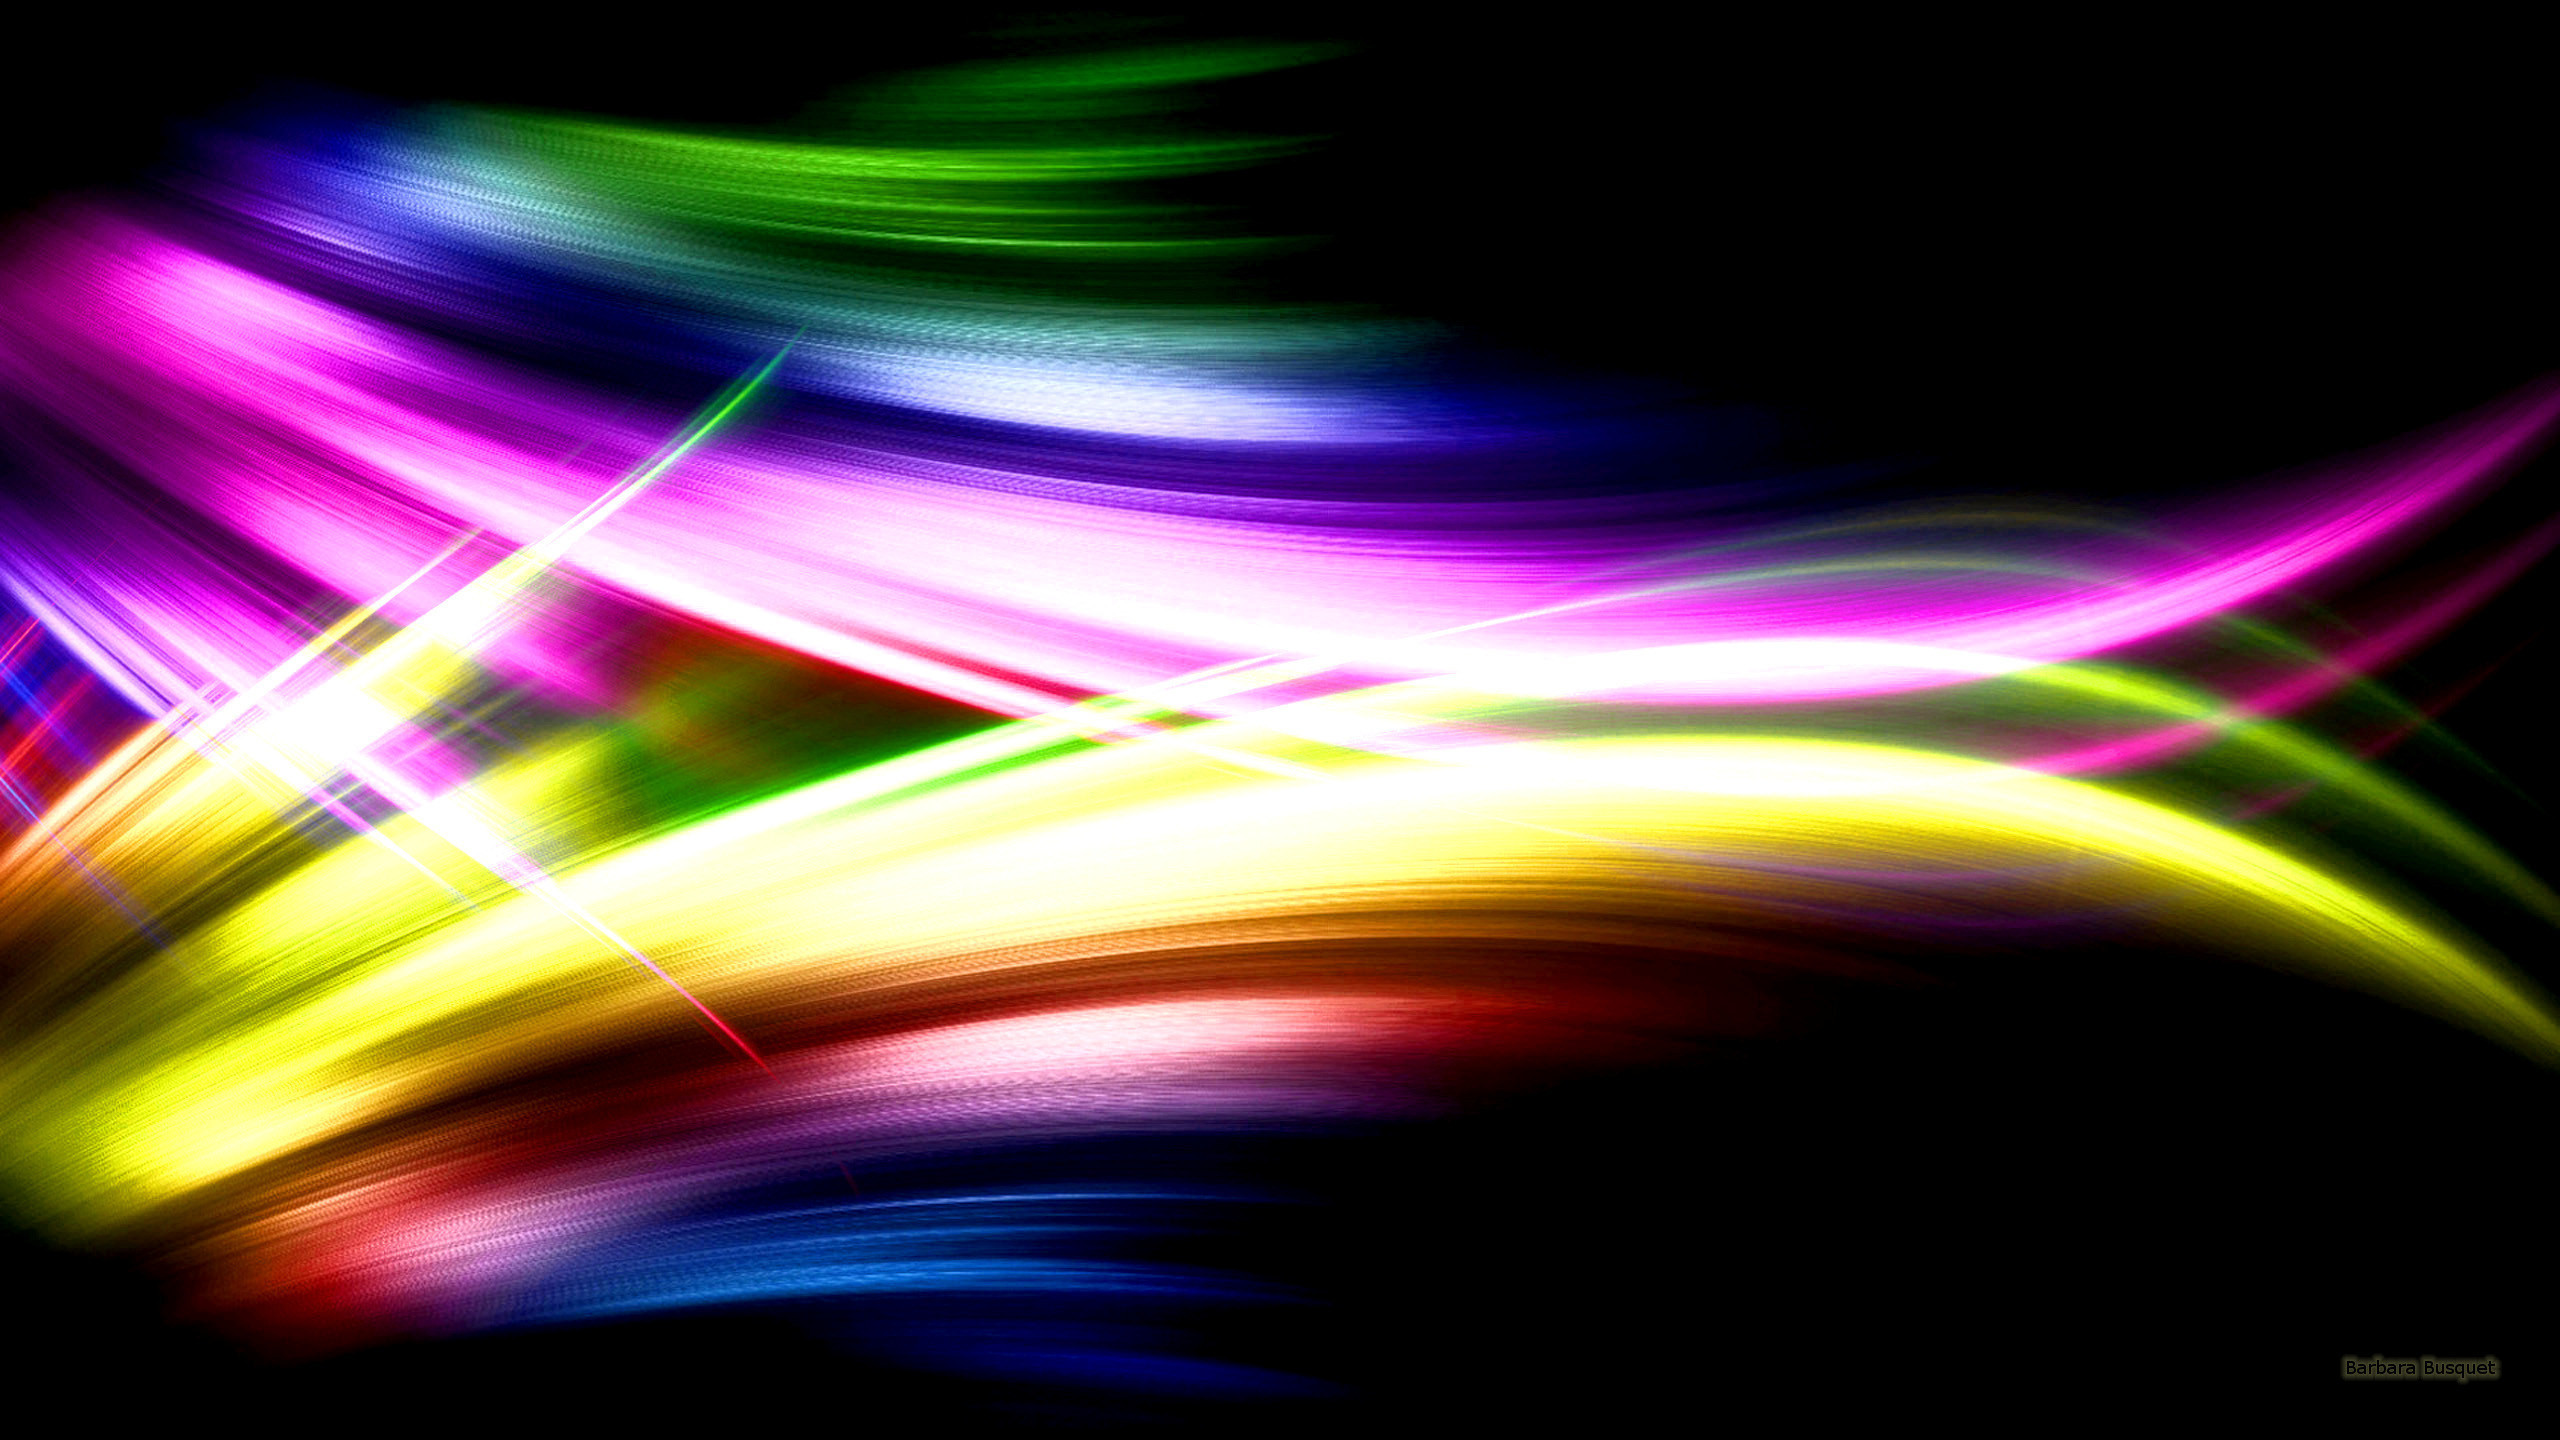 Dark abstract wallpaper with spectrum colors